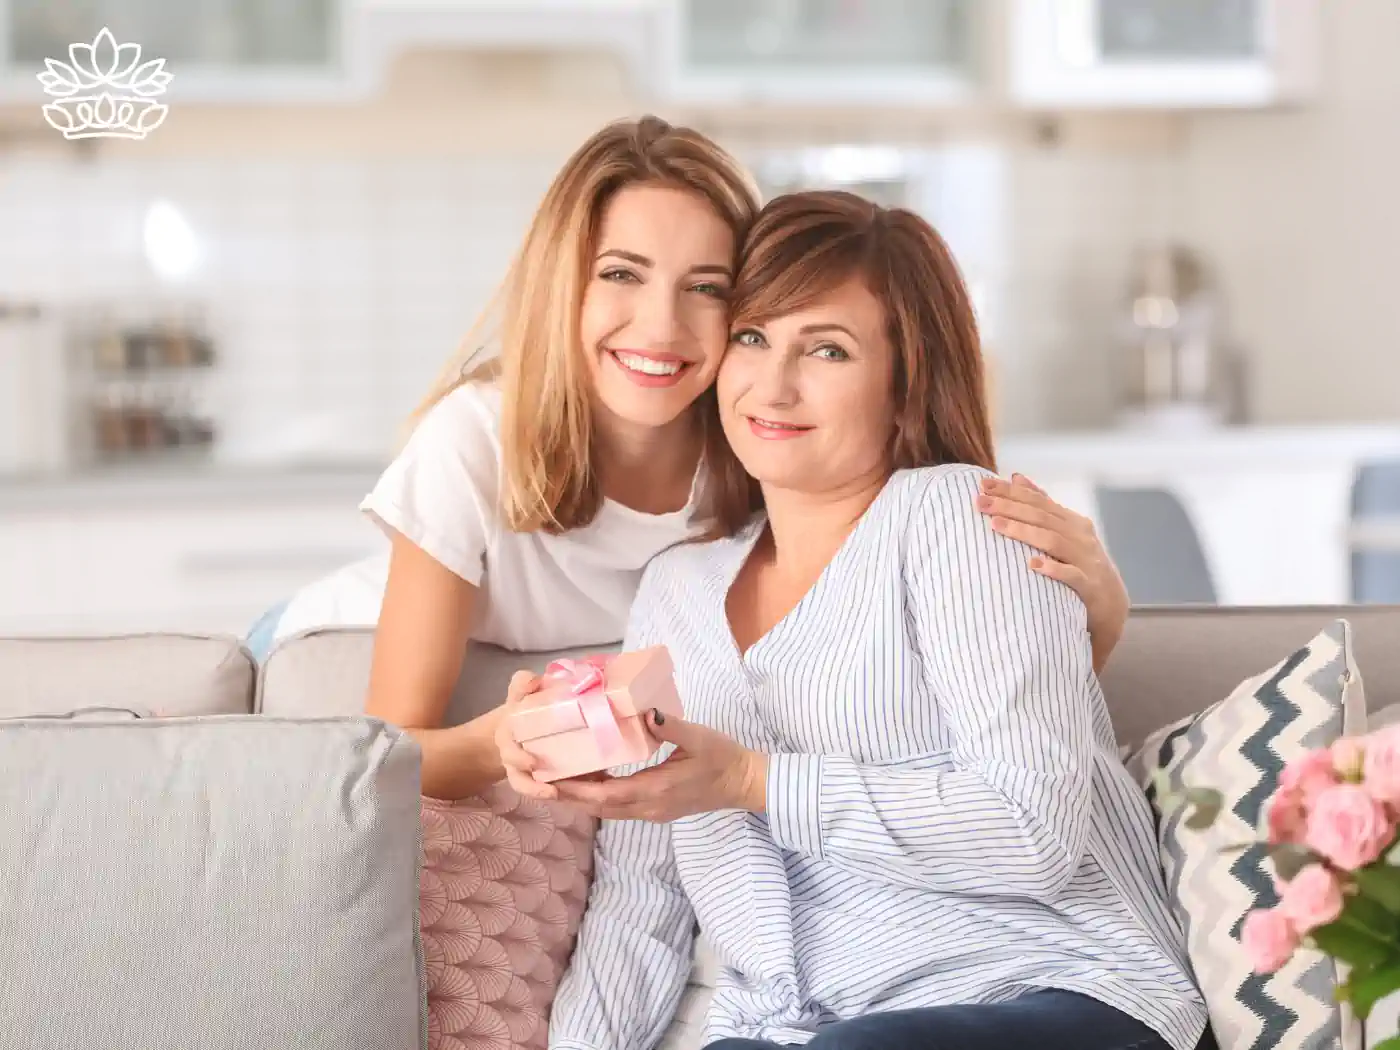 A mother and daughter sitting on a sofa, holding a pink gift box together. Fabulous Flowers and Gifts - Luxury Cape Town Gift Hampers.